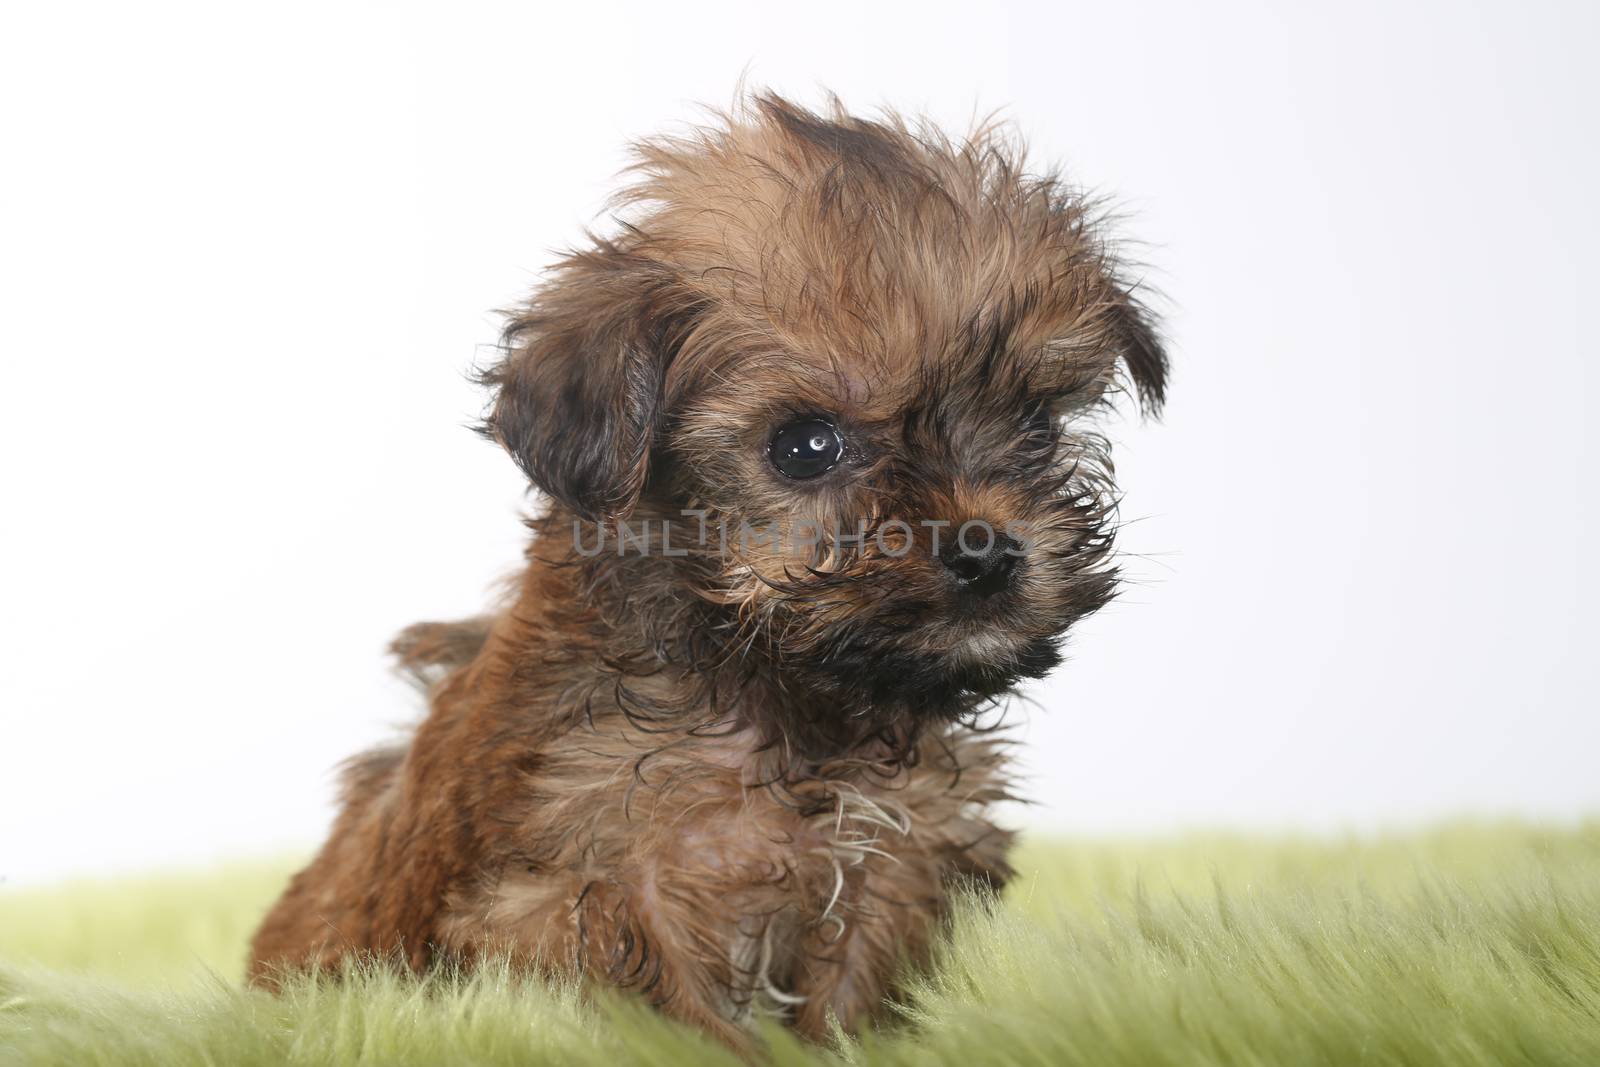 Adorable Teacup Yorkshire Terrier on White Background